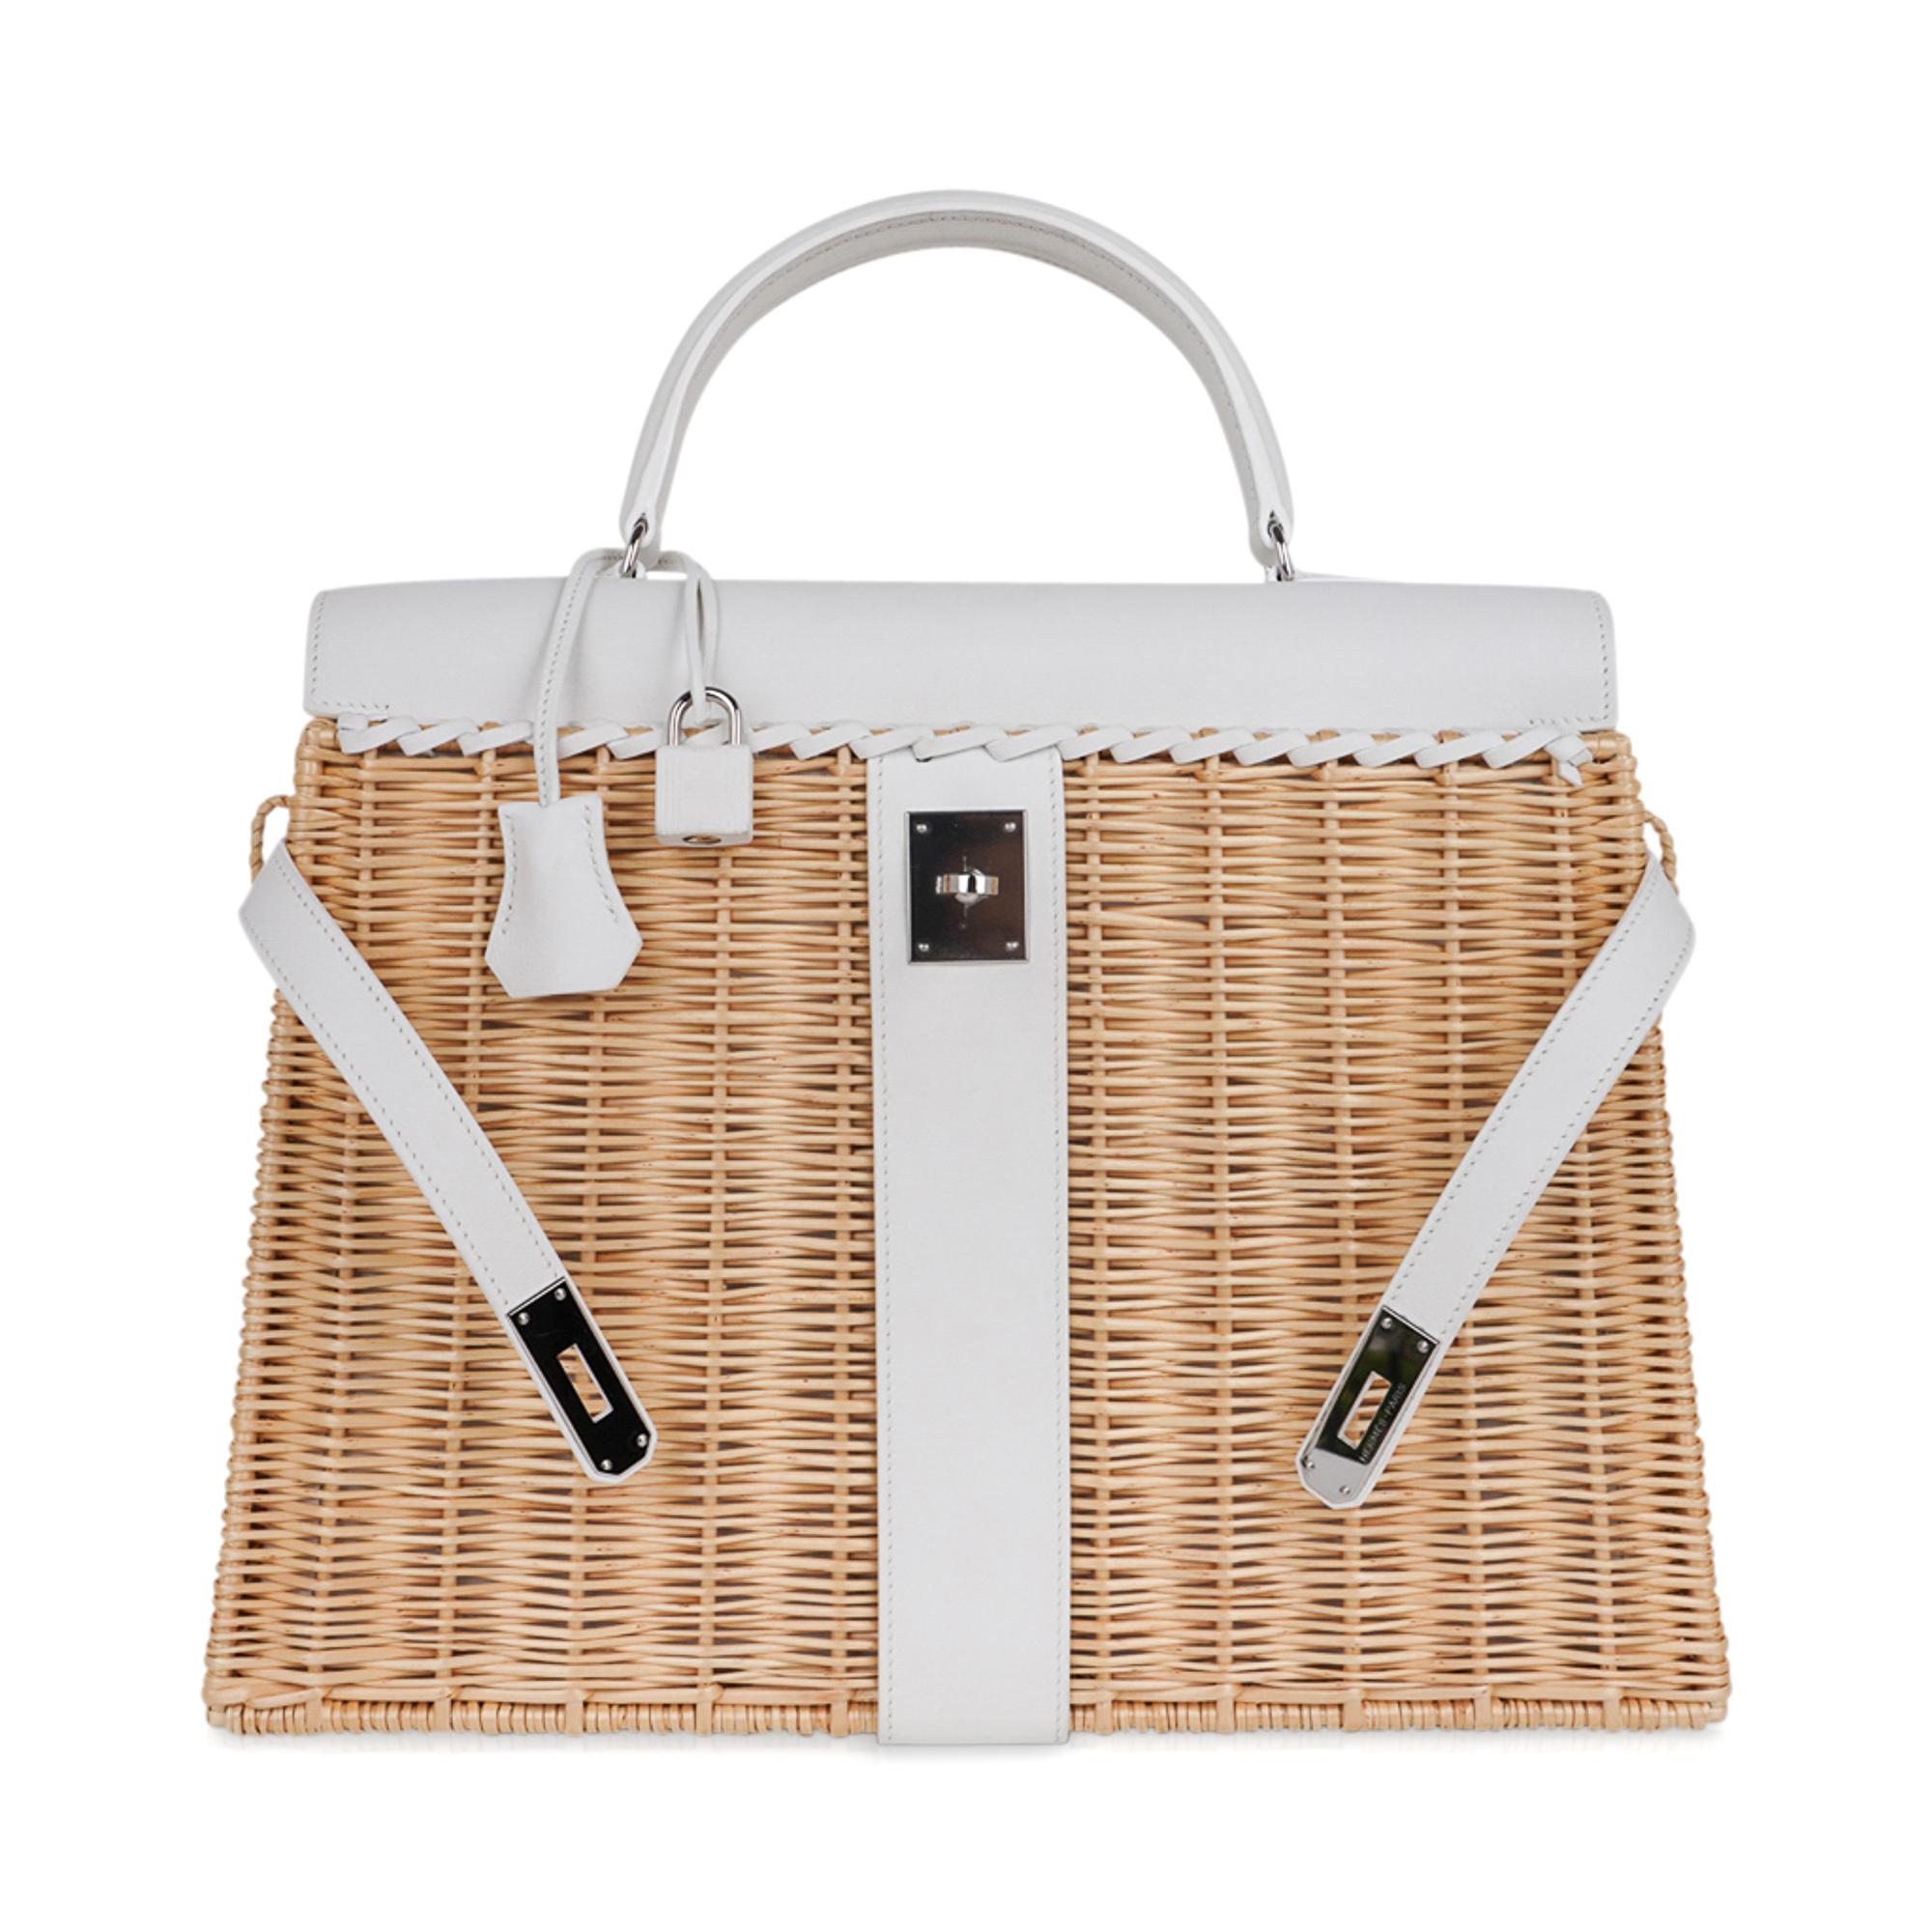 Hermes Kelly Picnic 35 Bag White Swift Leather / Osier (Wicker) Limited Edition 1